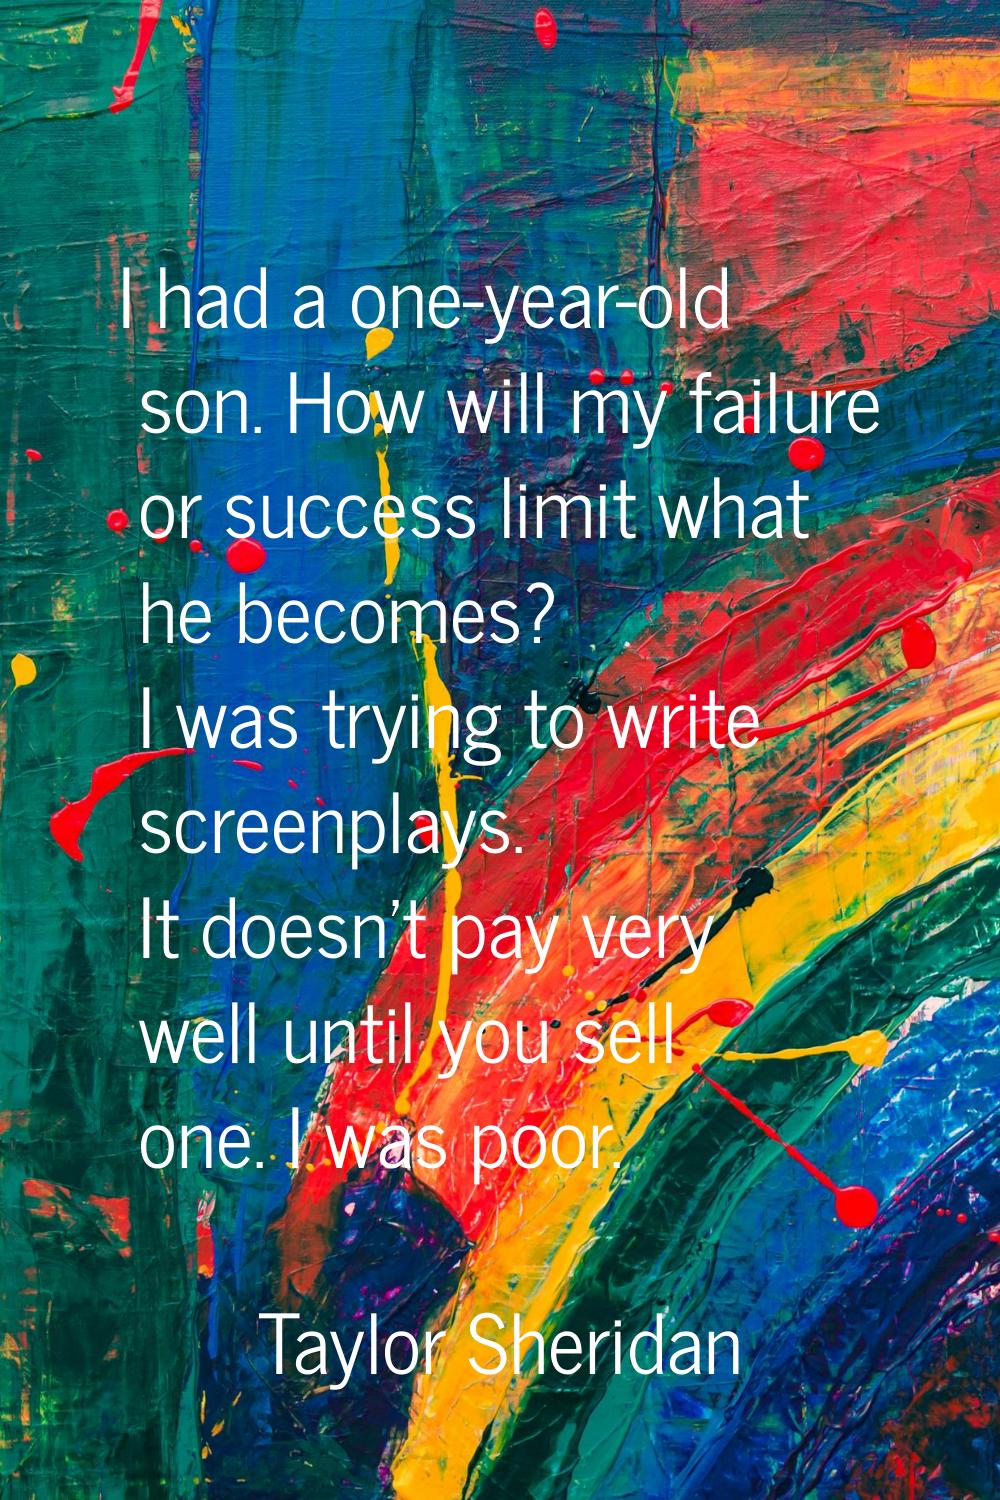 I had a one-year-old son. How will my failure or success limit what he becomes? I was trying to wri